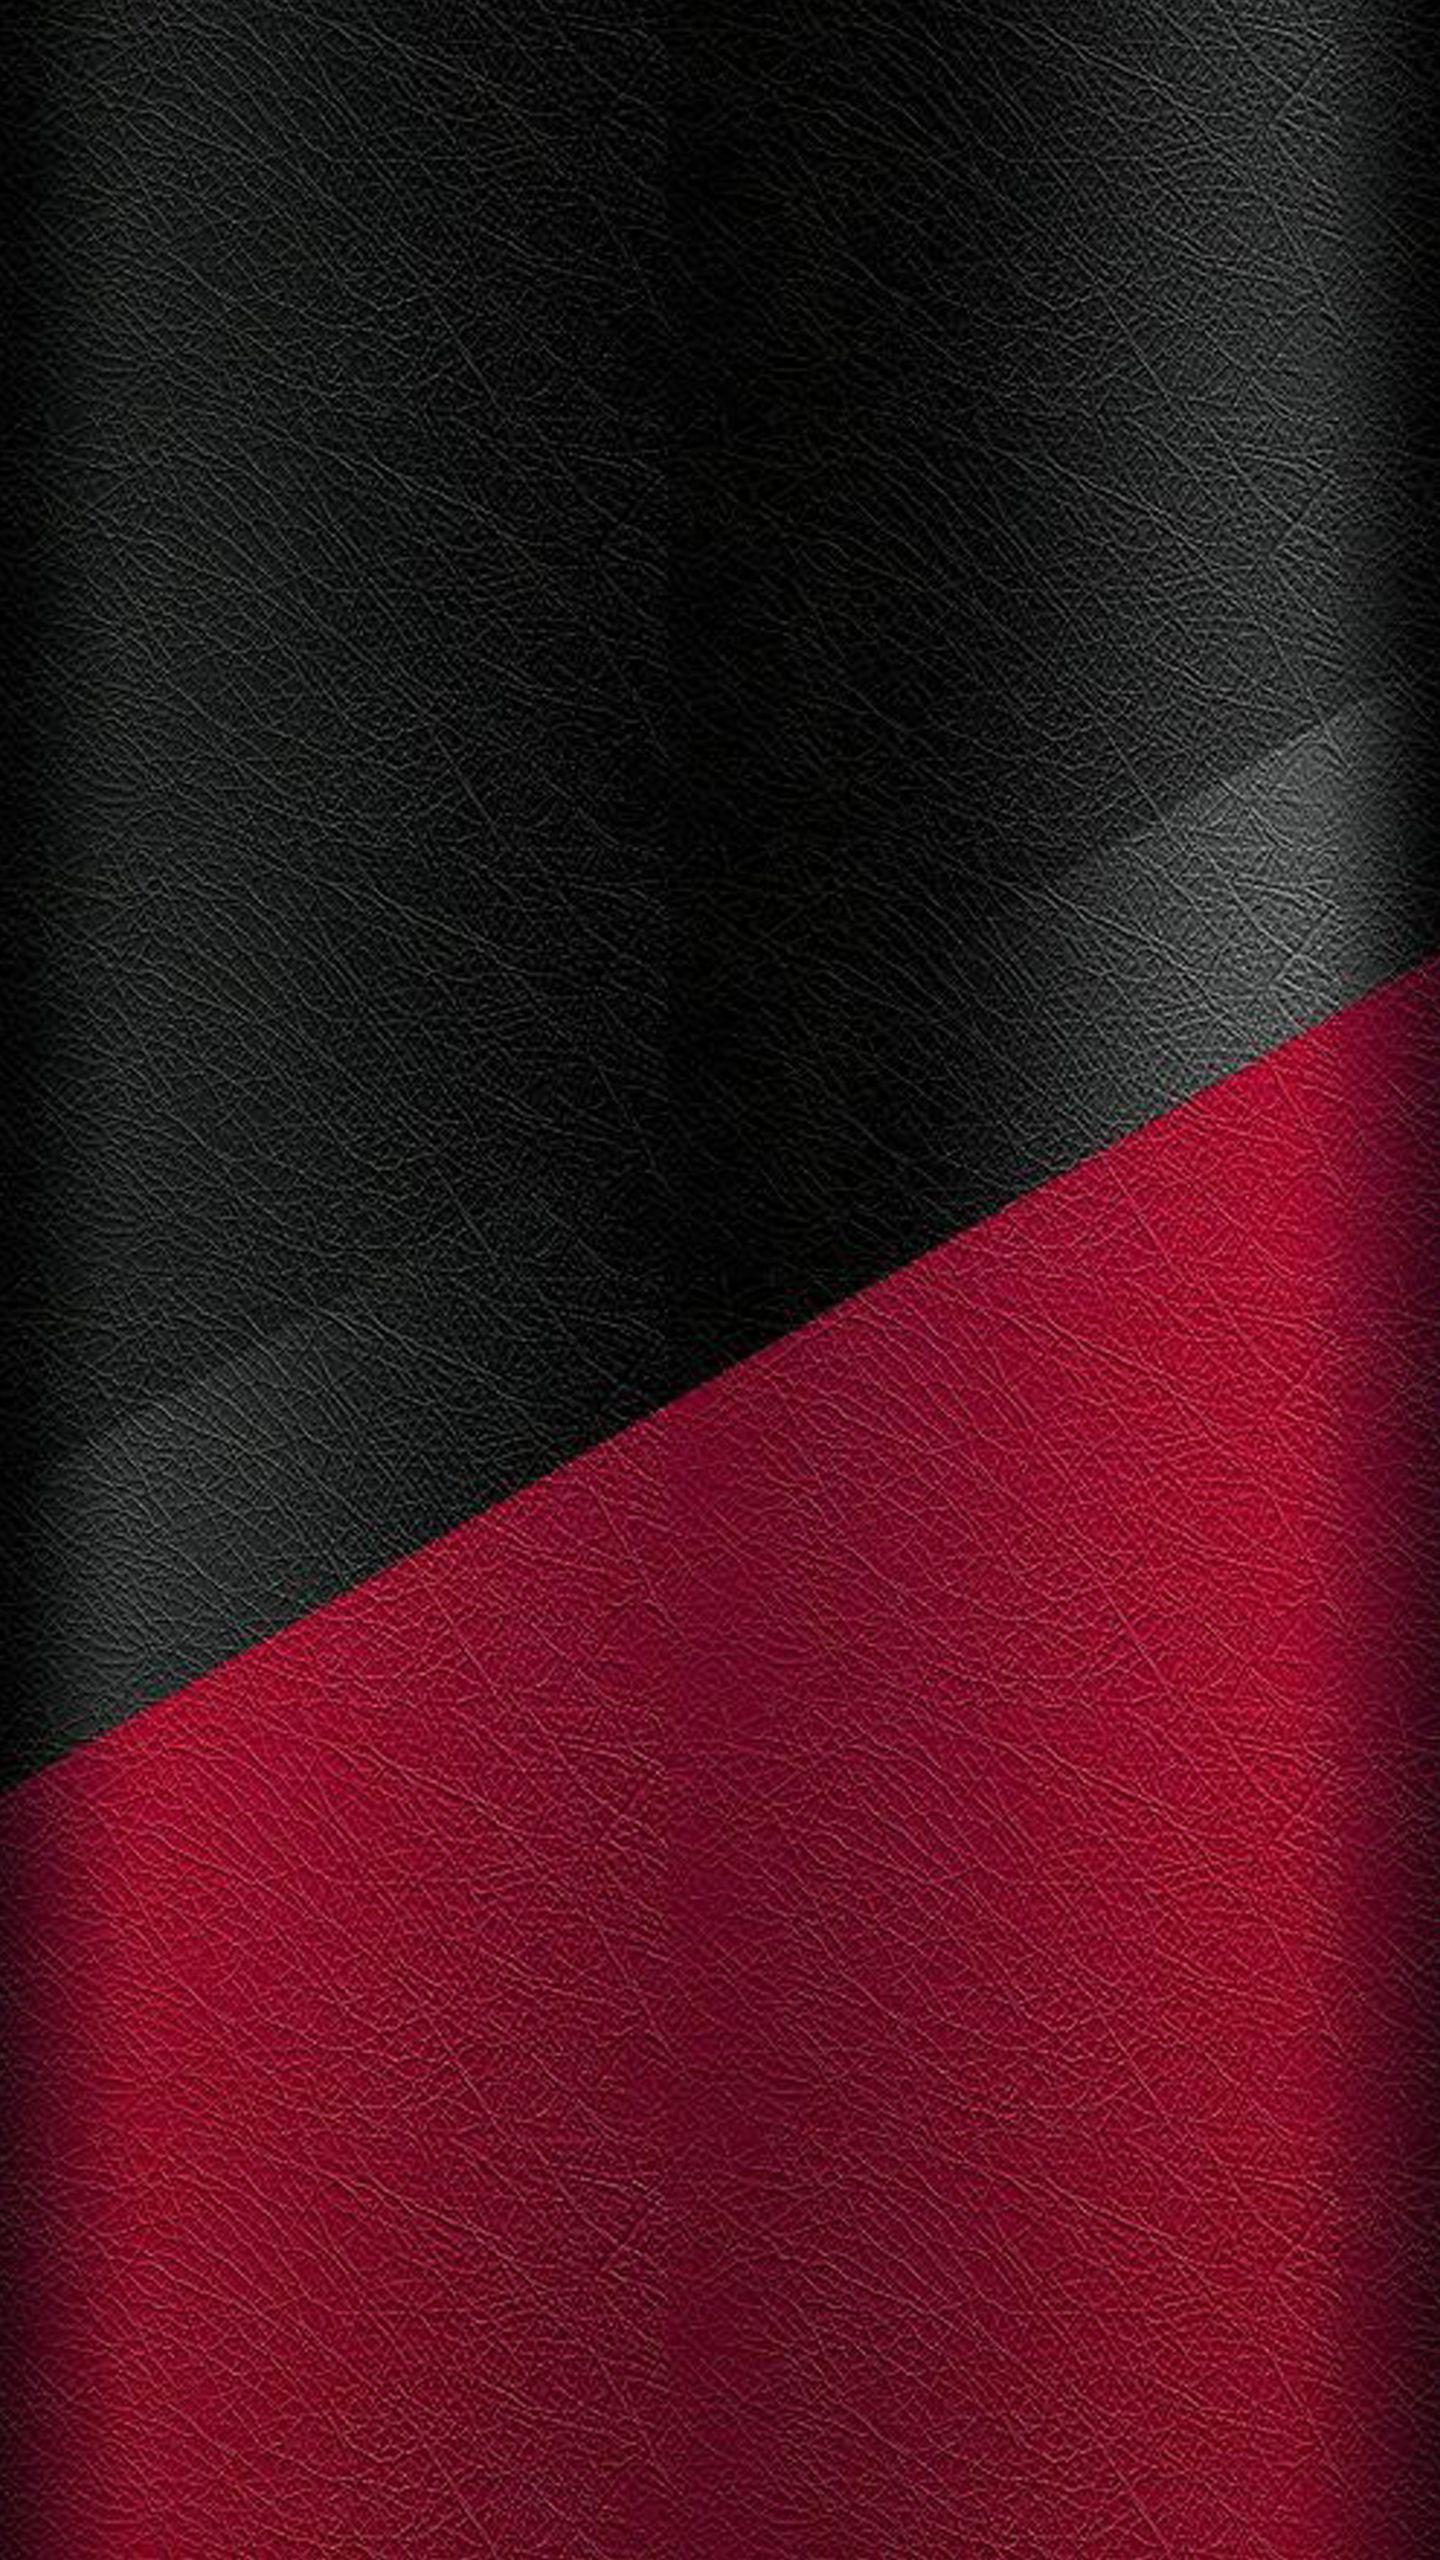 Dark S7 Edge Wallpaper 03 and Red. Leather